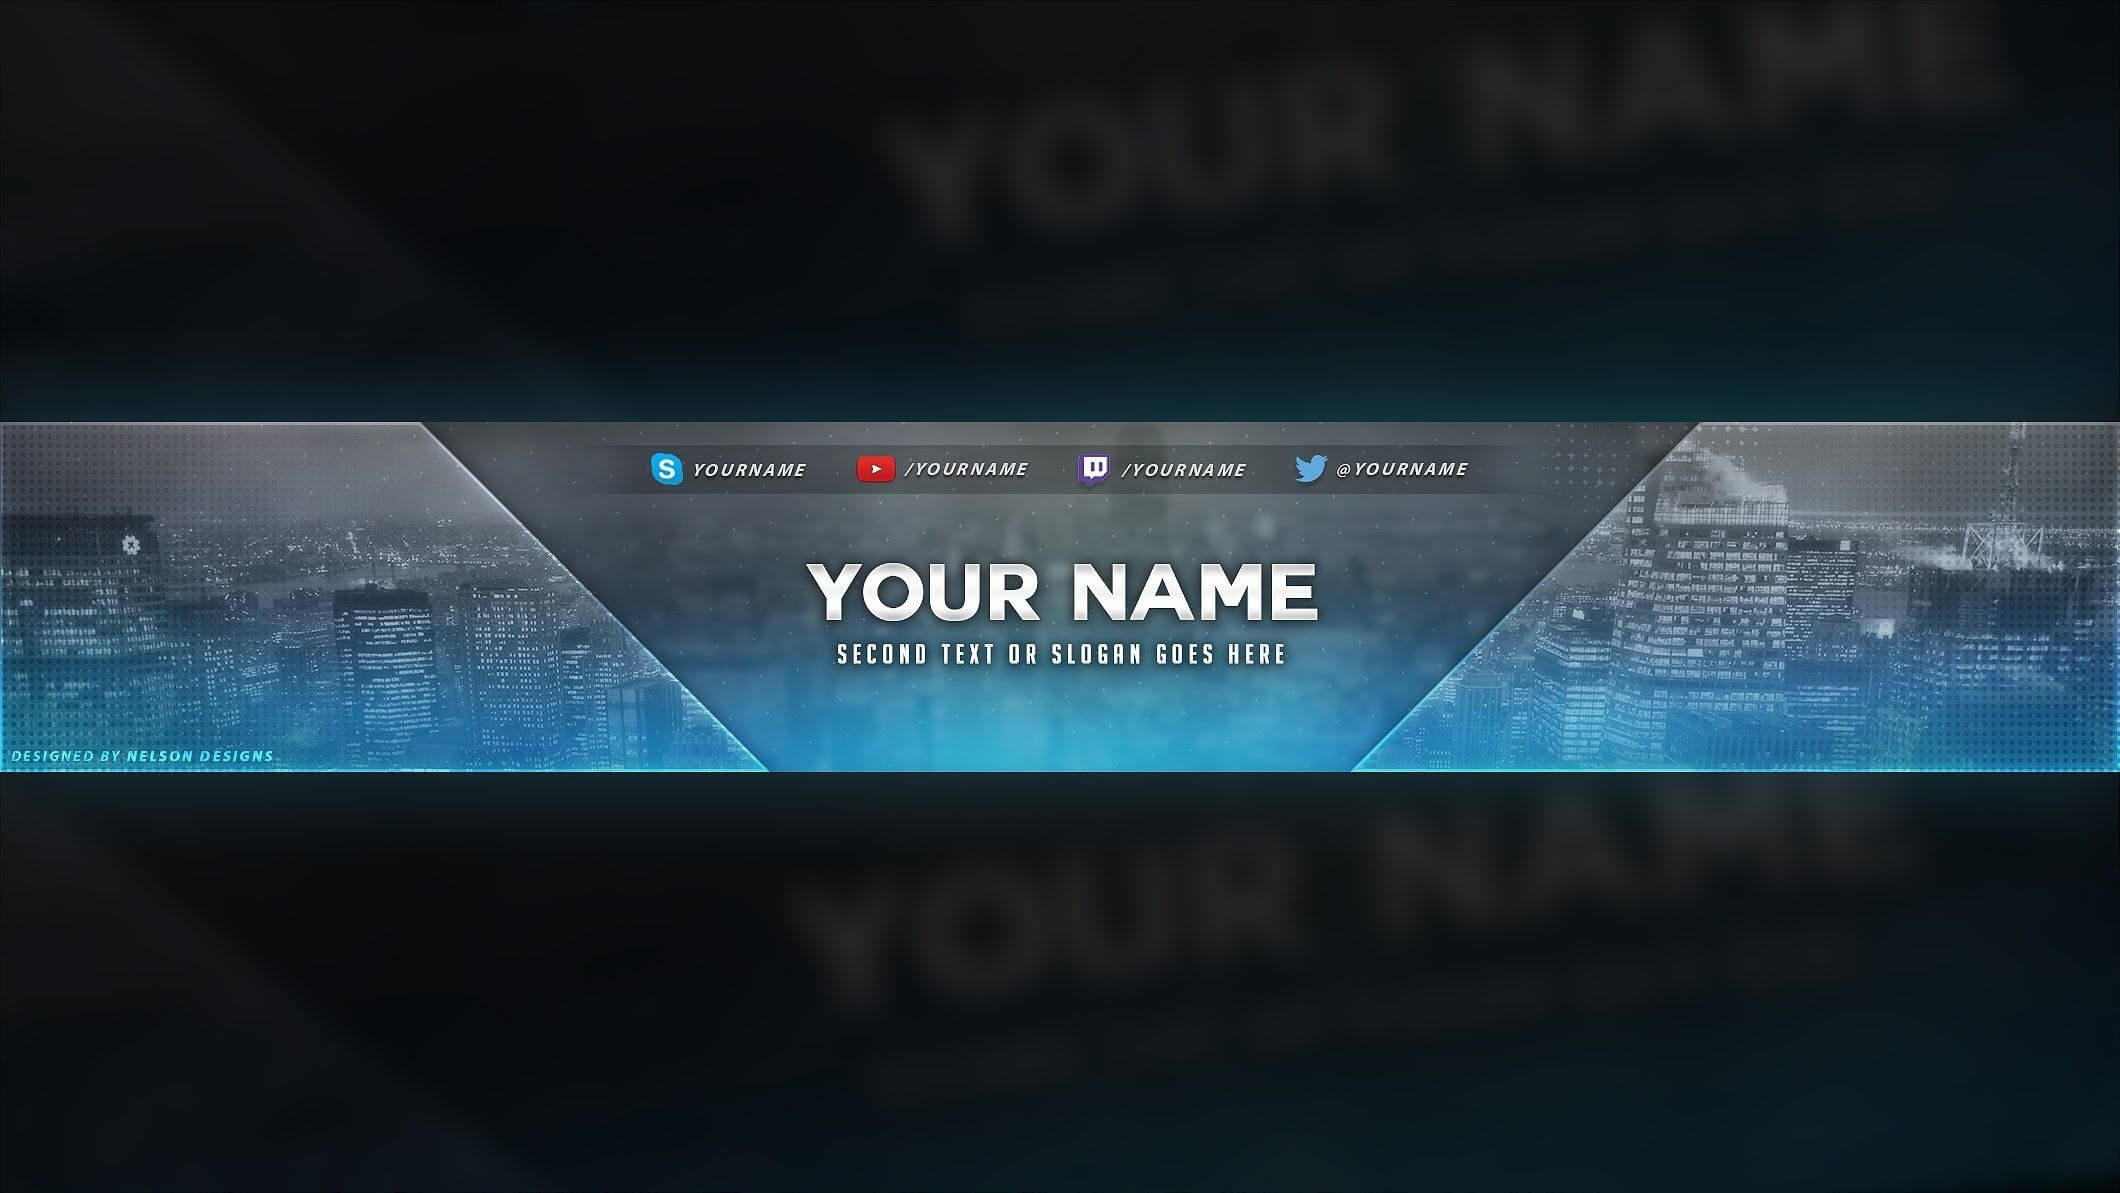 4 Free Youtube Banner Psd Template Designs – Social Media Within Banner Template For Photoshop